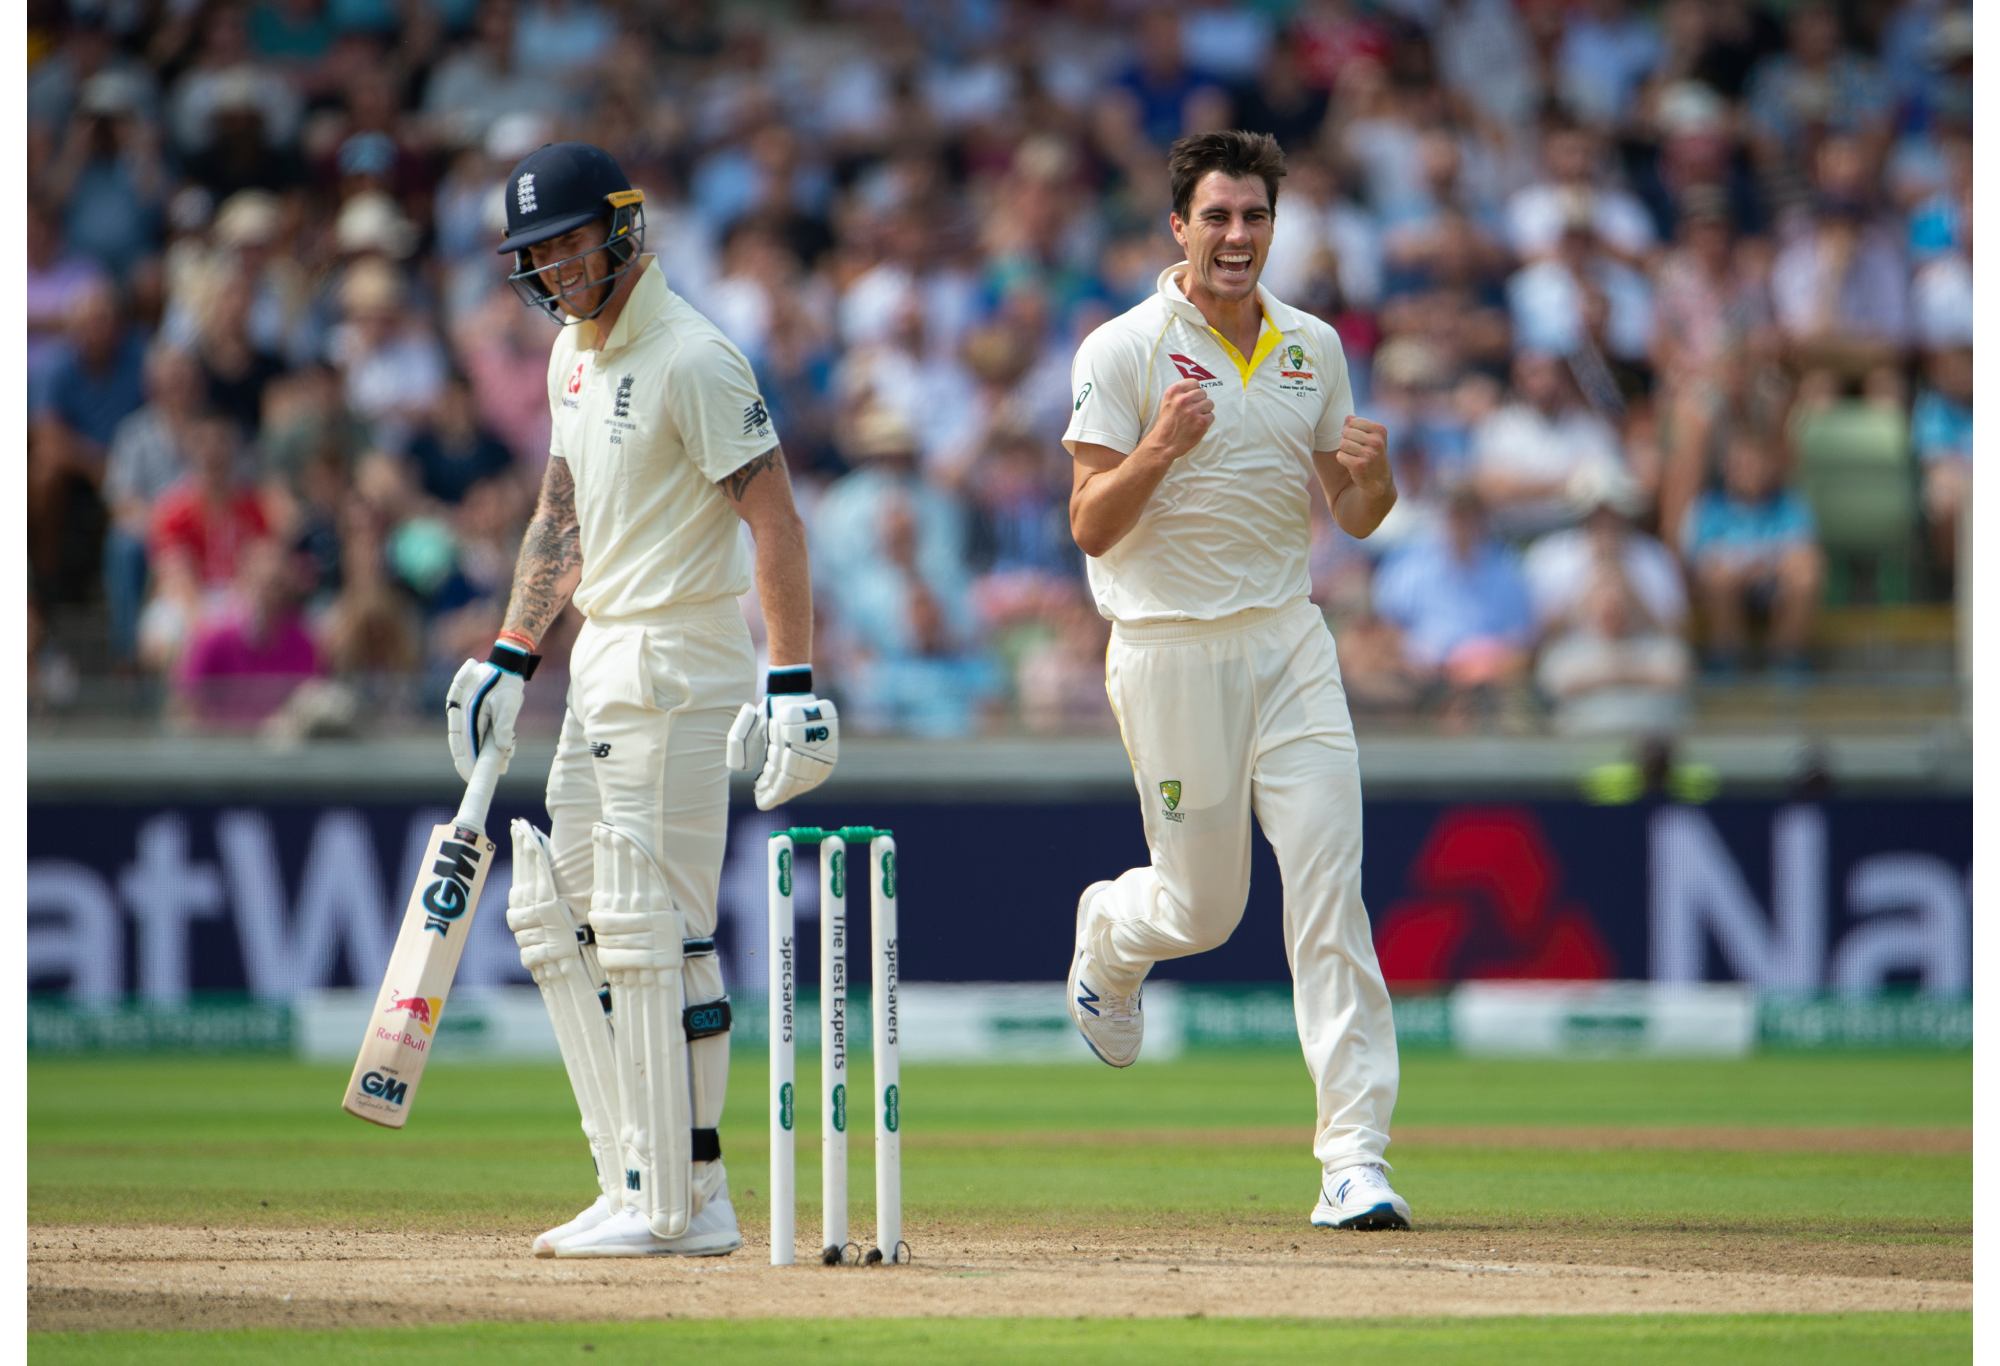 BIRMINGHAM, ENGLAND - AUGUST 03: Pat Cummins of Australia celebrates taking the wicket of Ben Stokes of England during day three of the First Ashes test match at Edgbaston on August 3, 2019 in Birmingham, England. (Photo by Visionhaus/Getty Images)